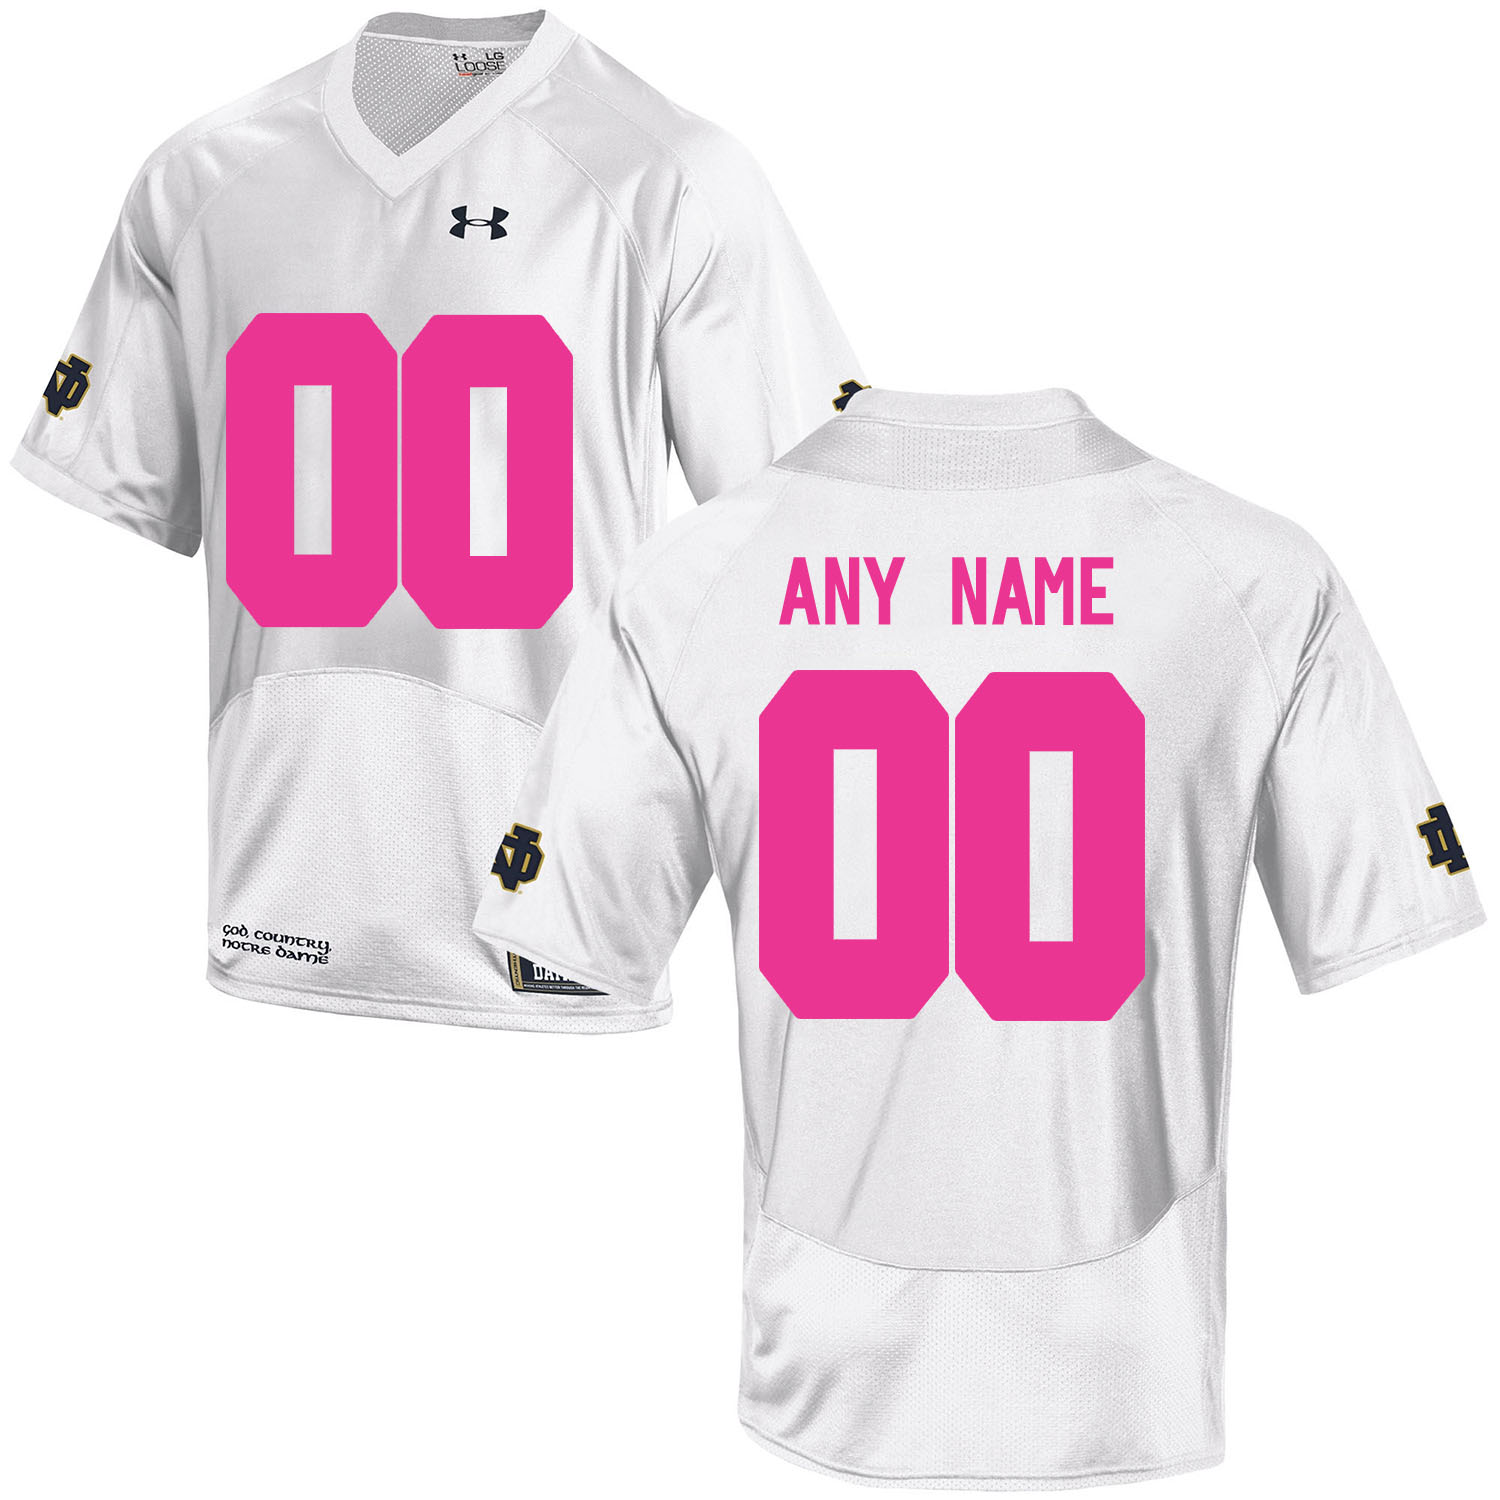 Notre Dame Fighting Irish White 2018 Breast Cancer Awareness Men's Customized College Football Jersey